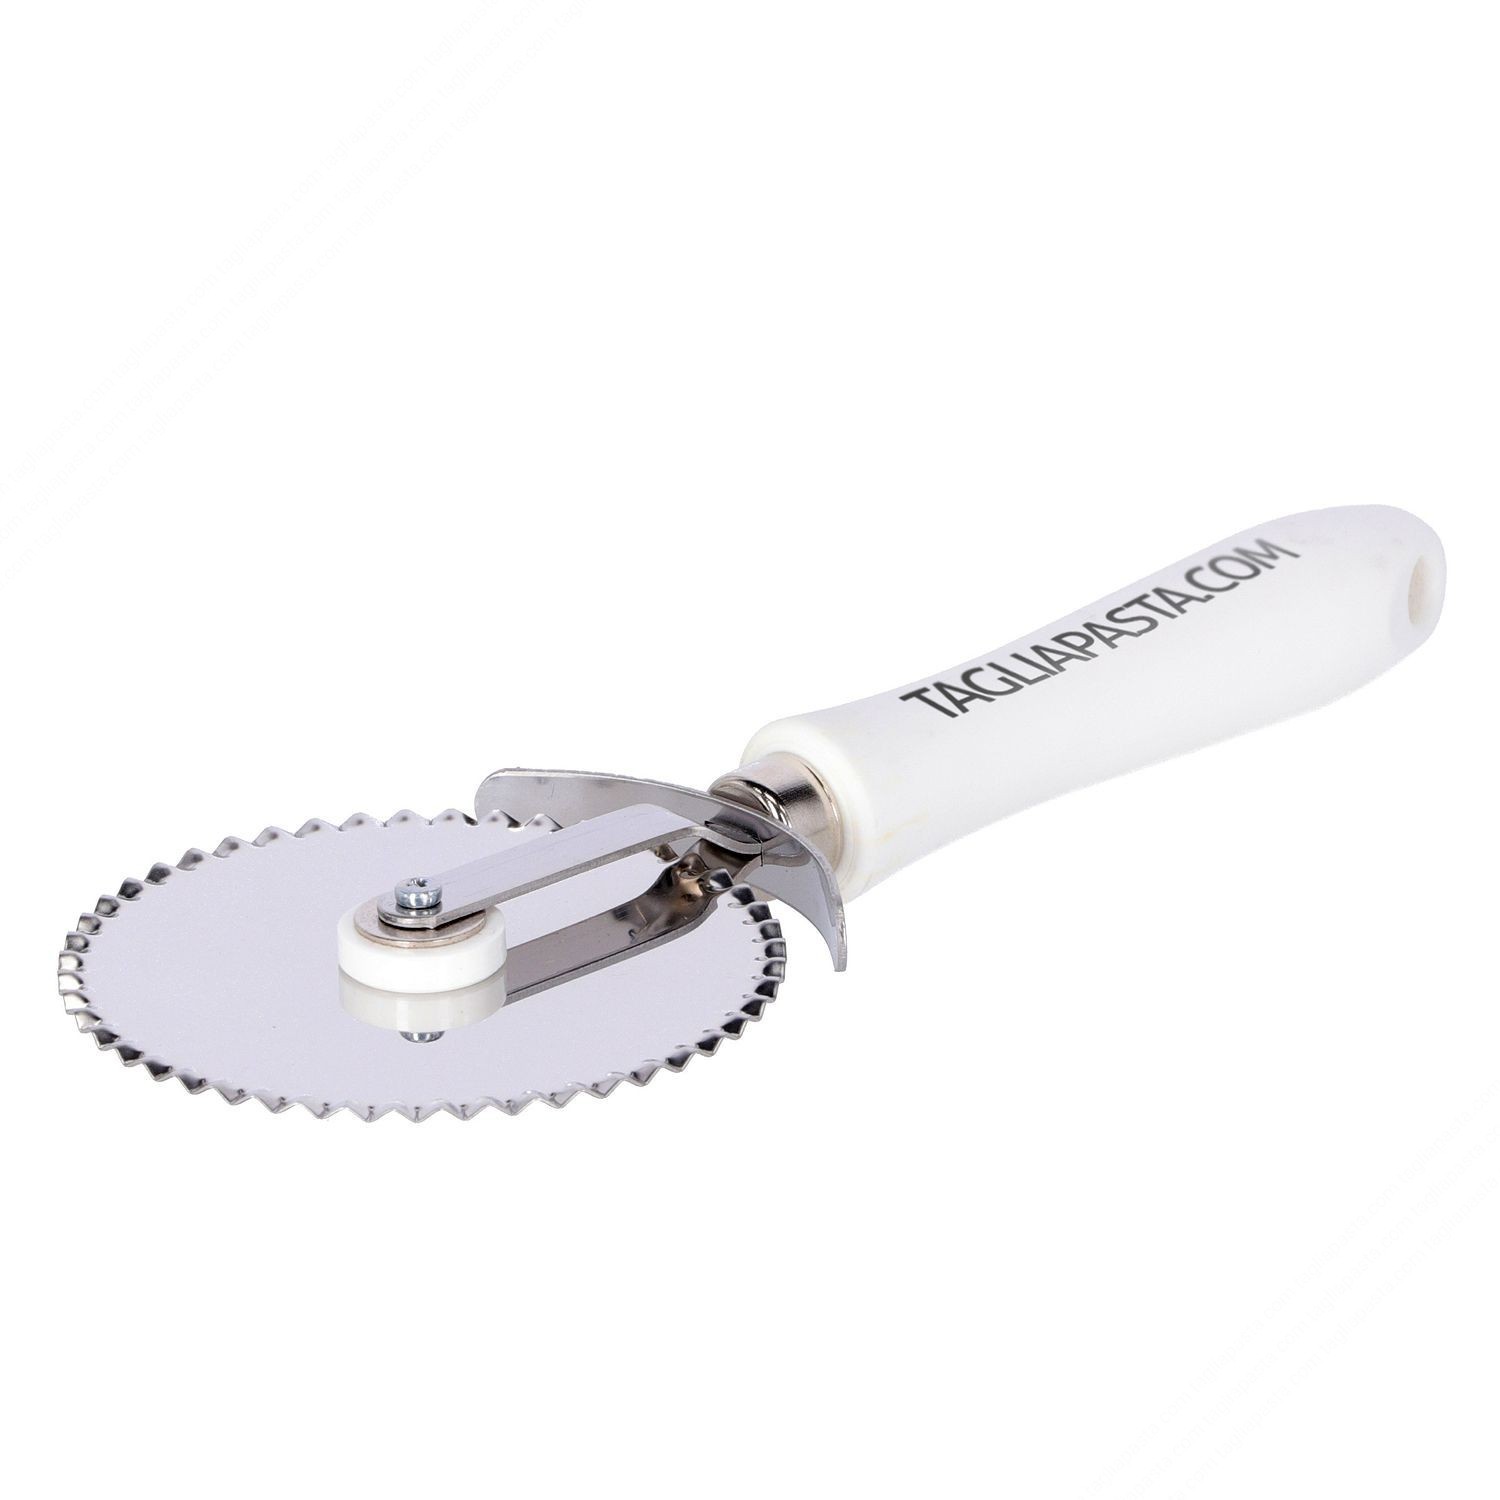 Multi Wheel Pastry Cutter, 7 Blade Stainless Steel Pasta Pizza